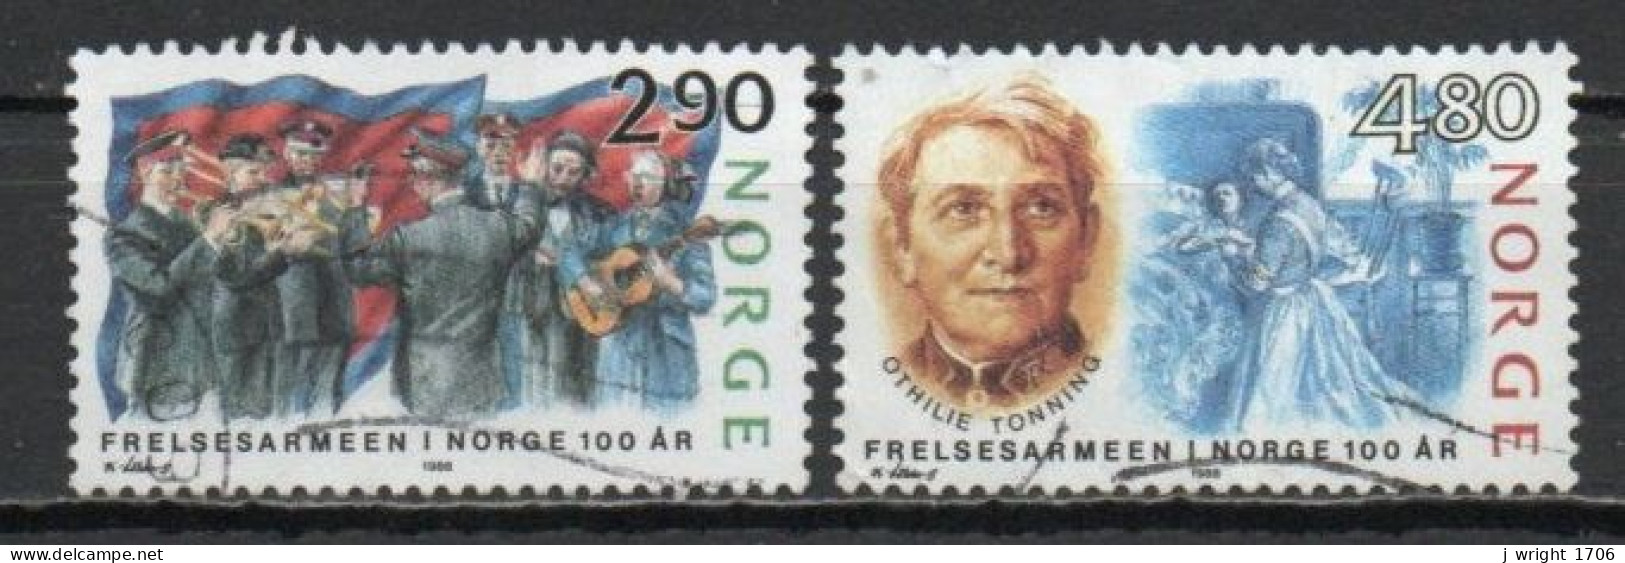 Norway, 1988, Salvation Army In Norway Centenary, Set, USED - Used Stamps